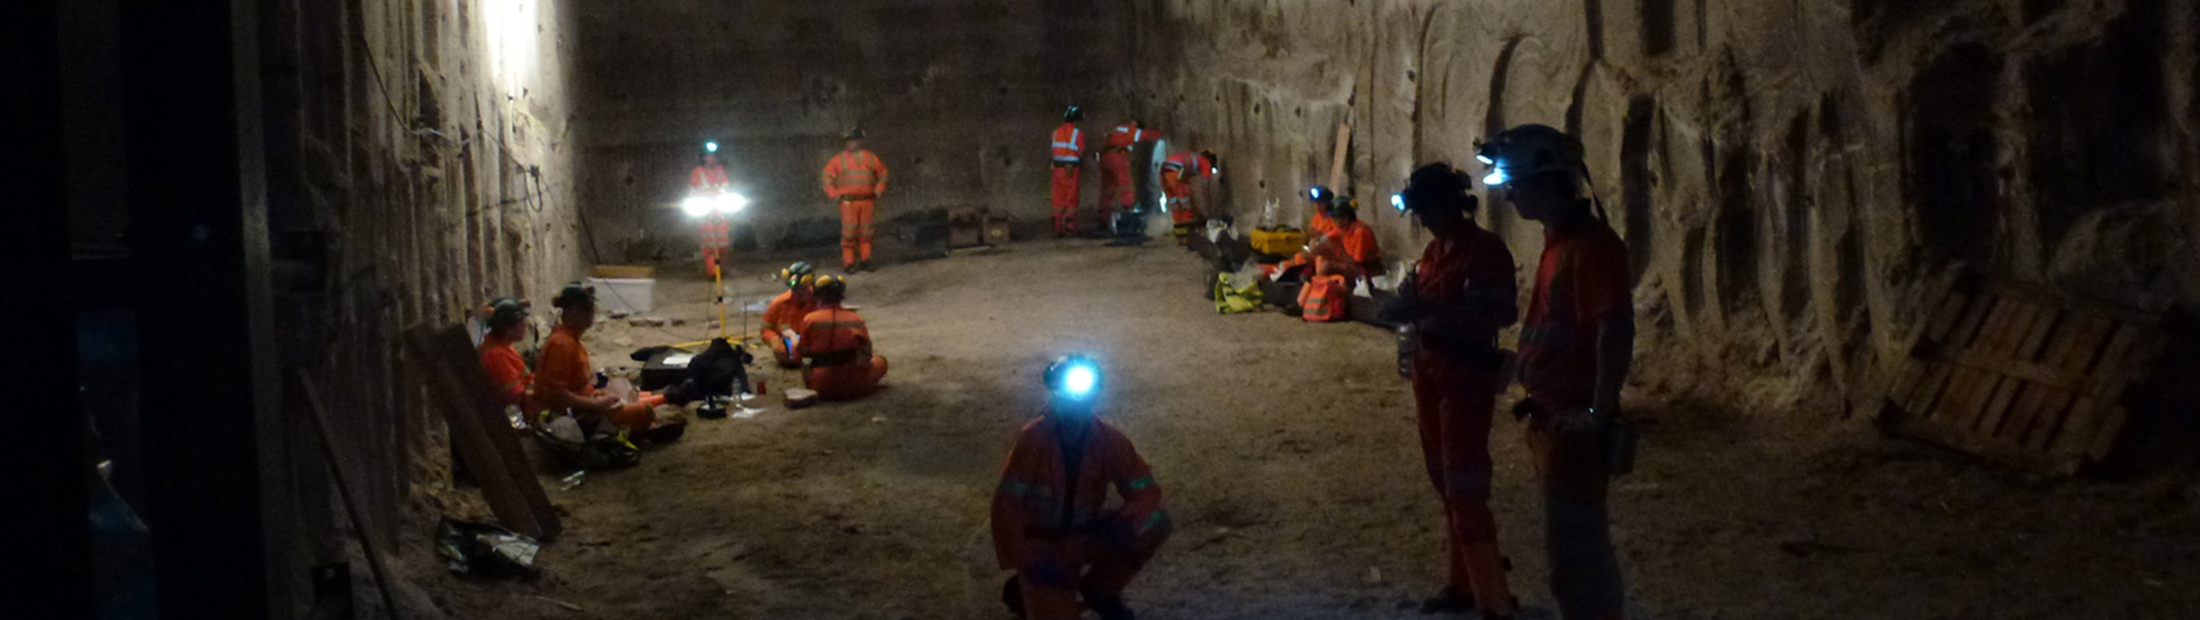 Several people in orange jumpsuits and hardhats in an underground tunnel.